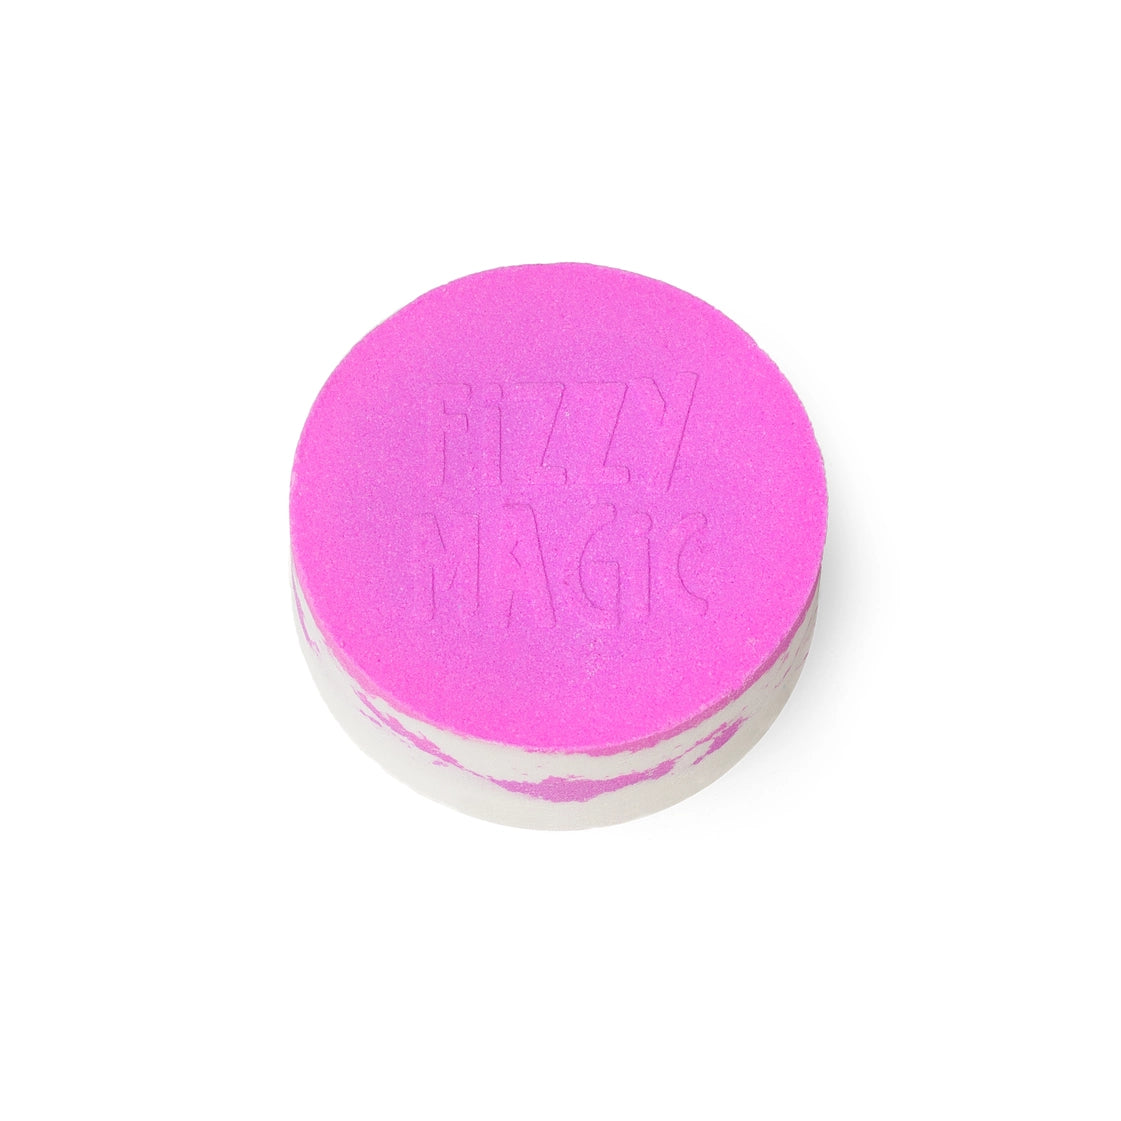 Fizzy Magic Surprises 2 Puck Shaped Bath Bombs - Water Toy Refill